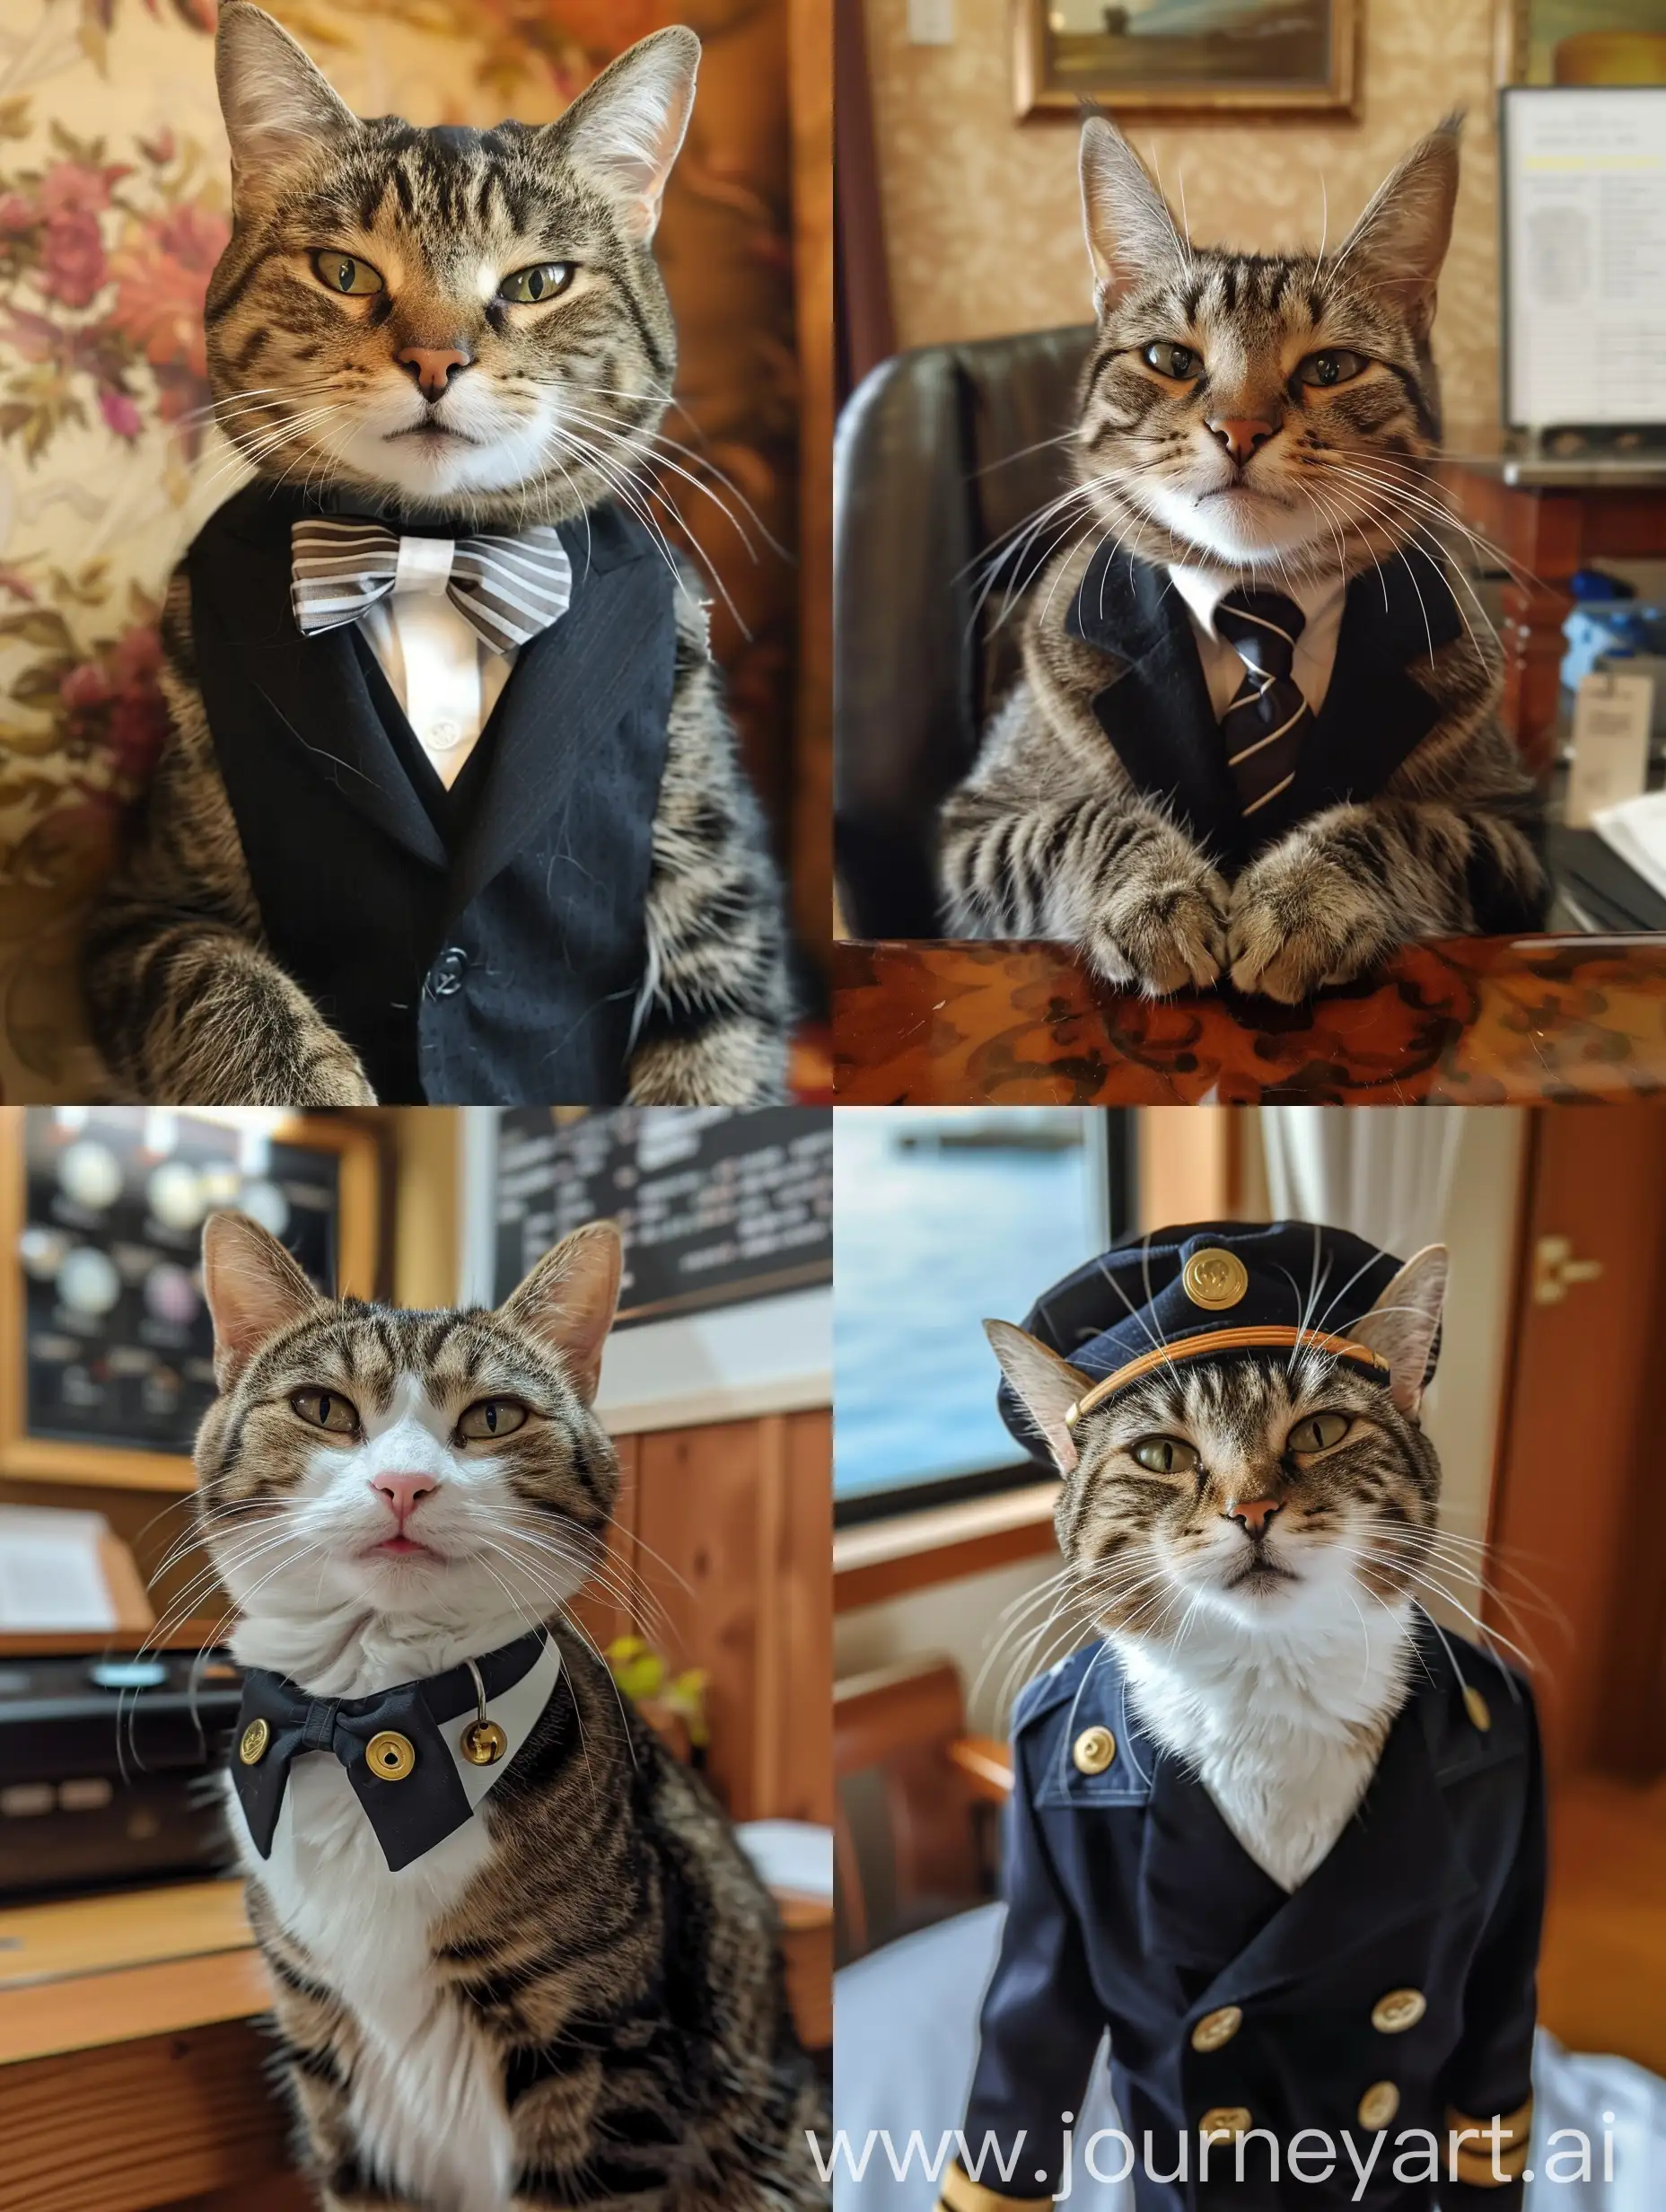 A cat in a role of hotel administrator, smiling